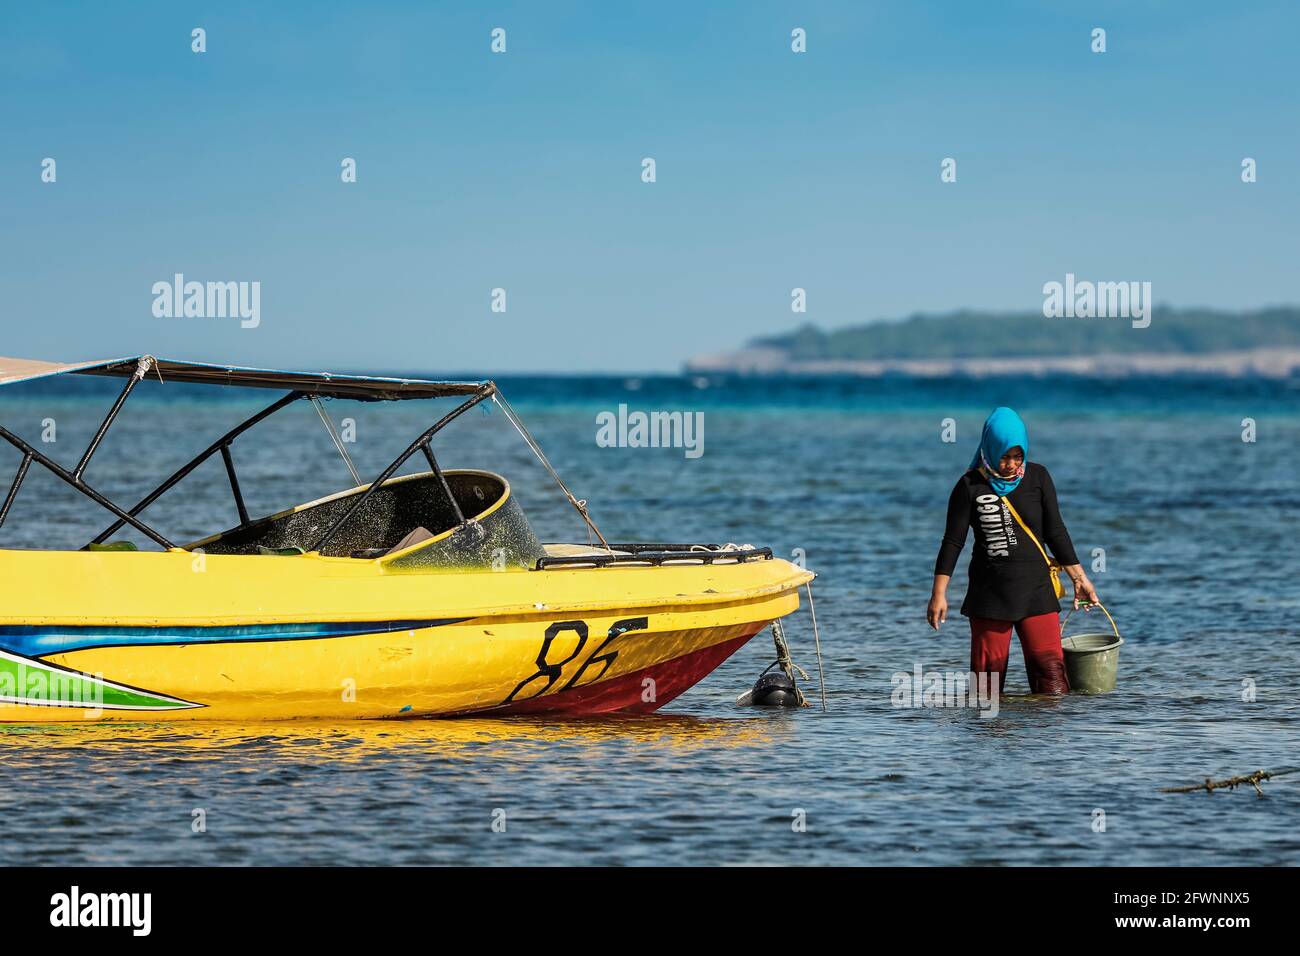 Local woman harvesting seaweed from the seashore by a tourist speedboat at this far South resort town beach; Tanjung Bira, South Sulawesi, Indonesia Stock Photo